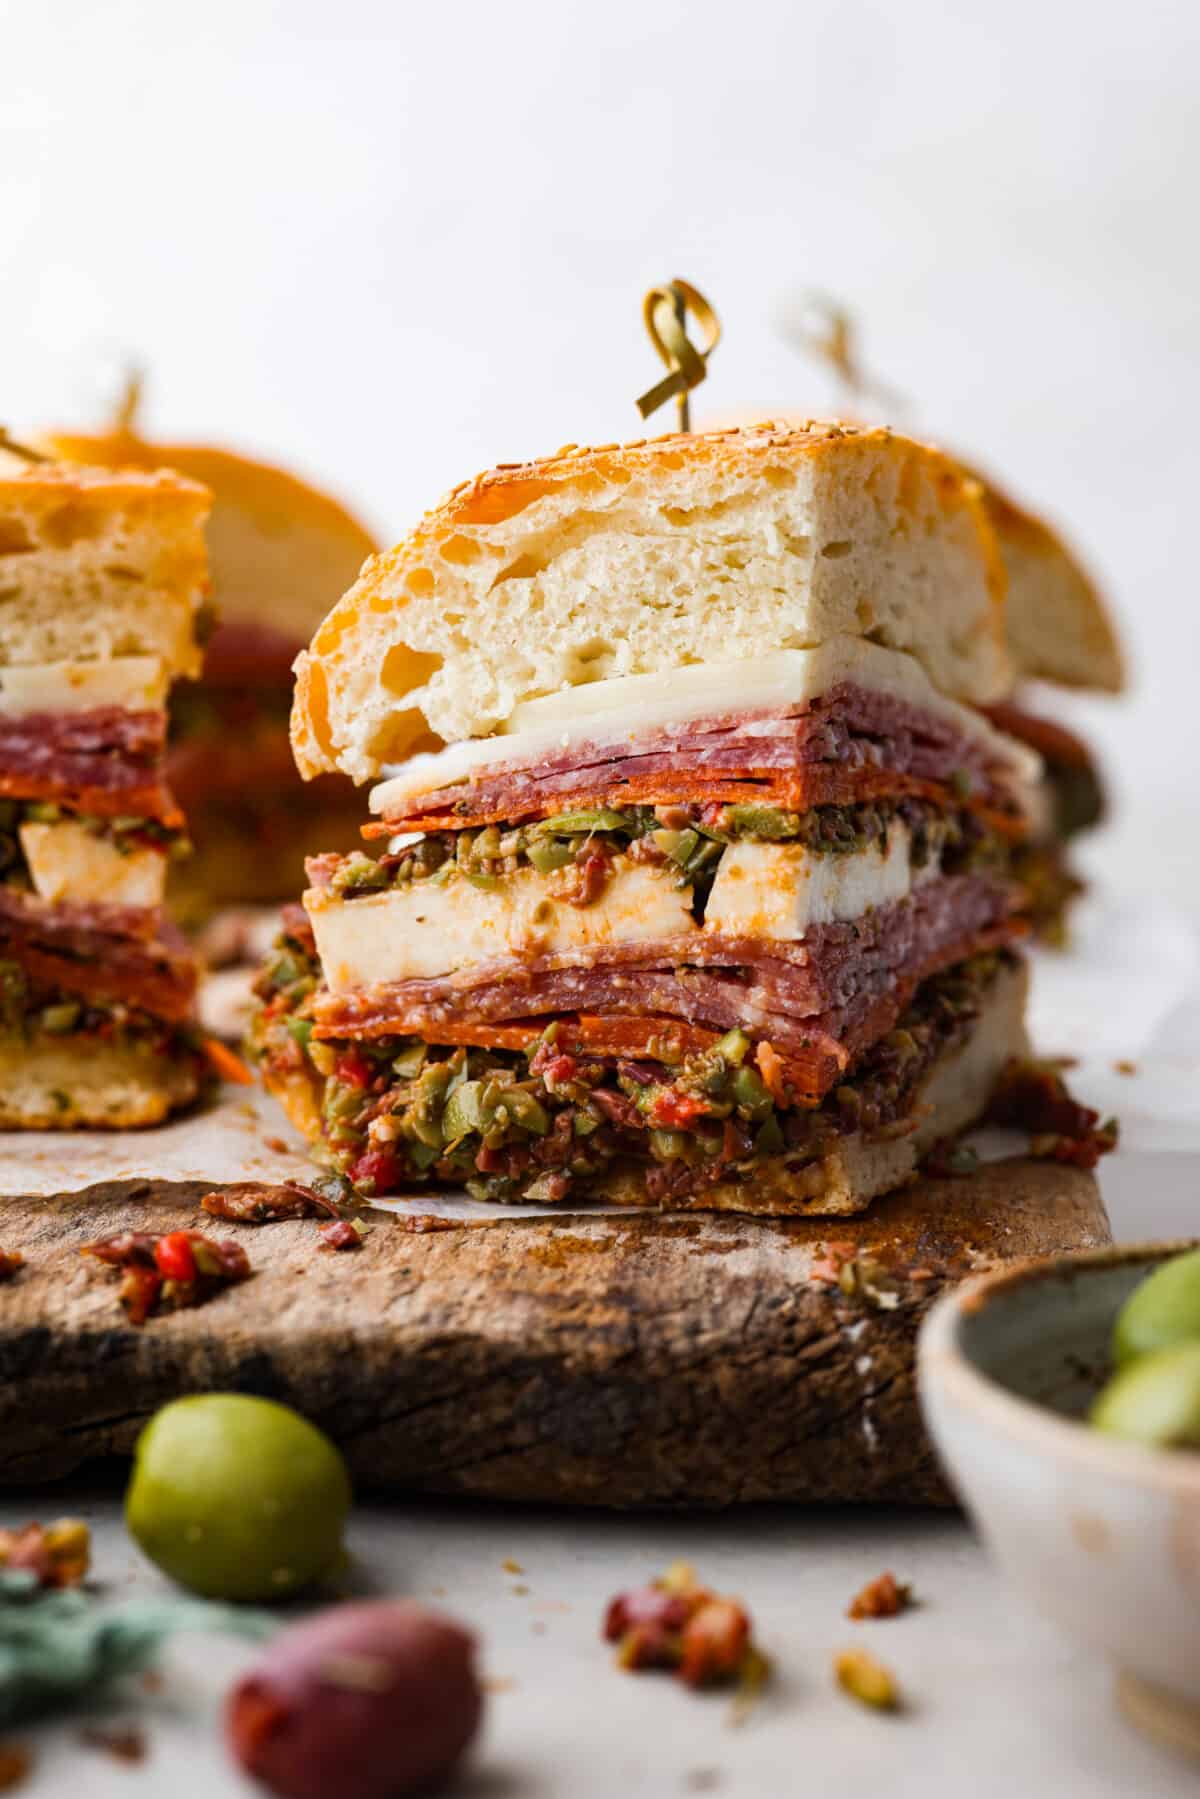 A quarter of a muffuletta sandwich, held together with a toothpick.